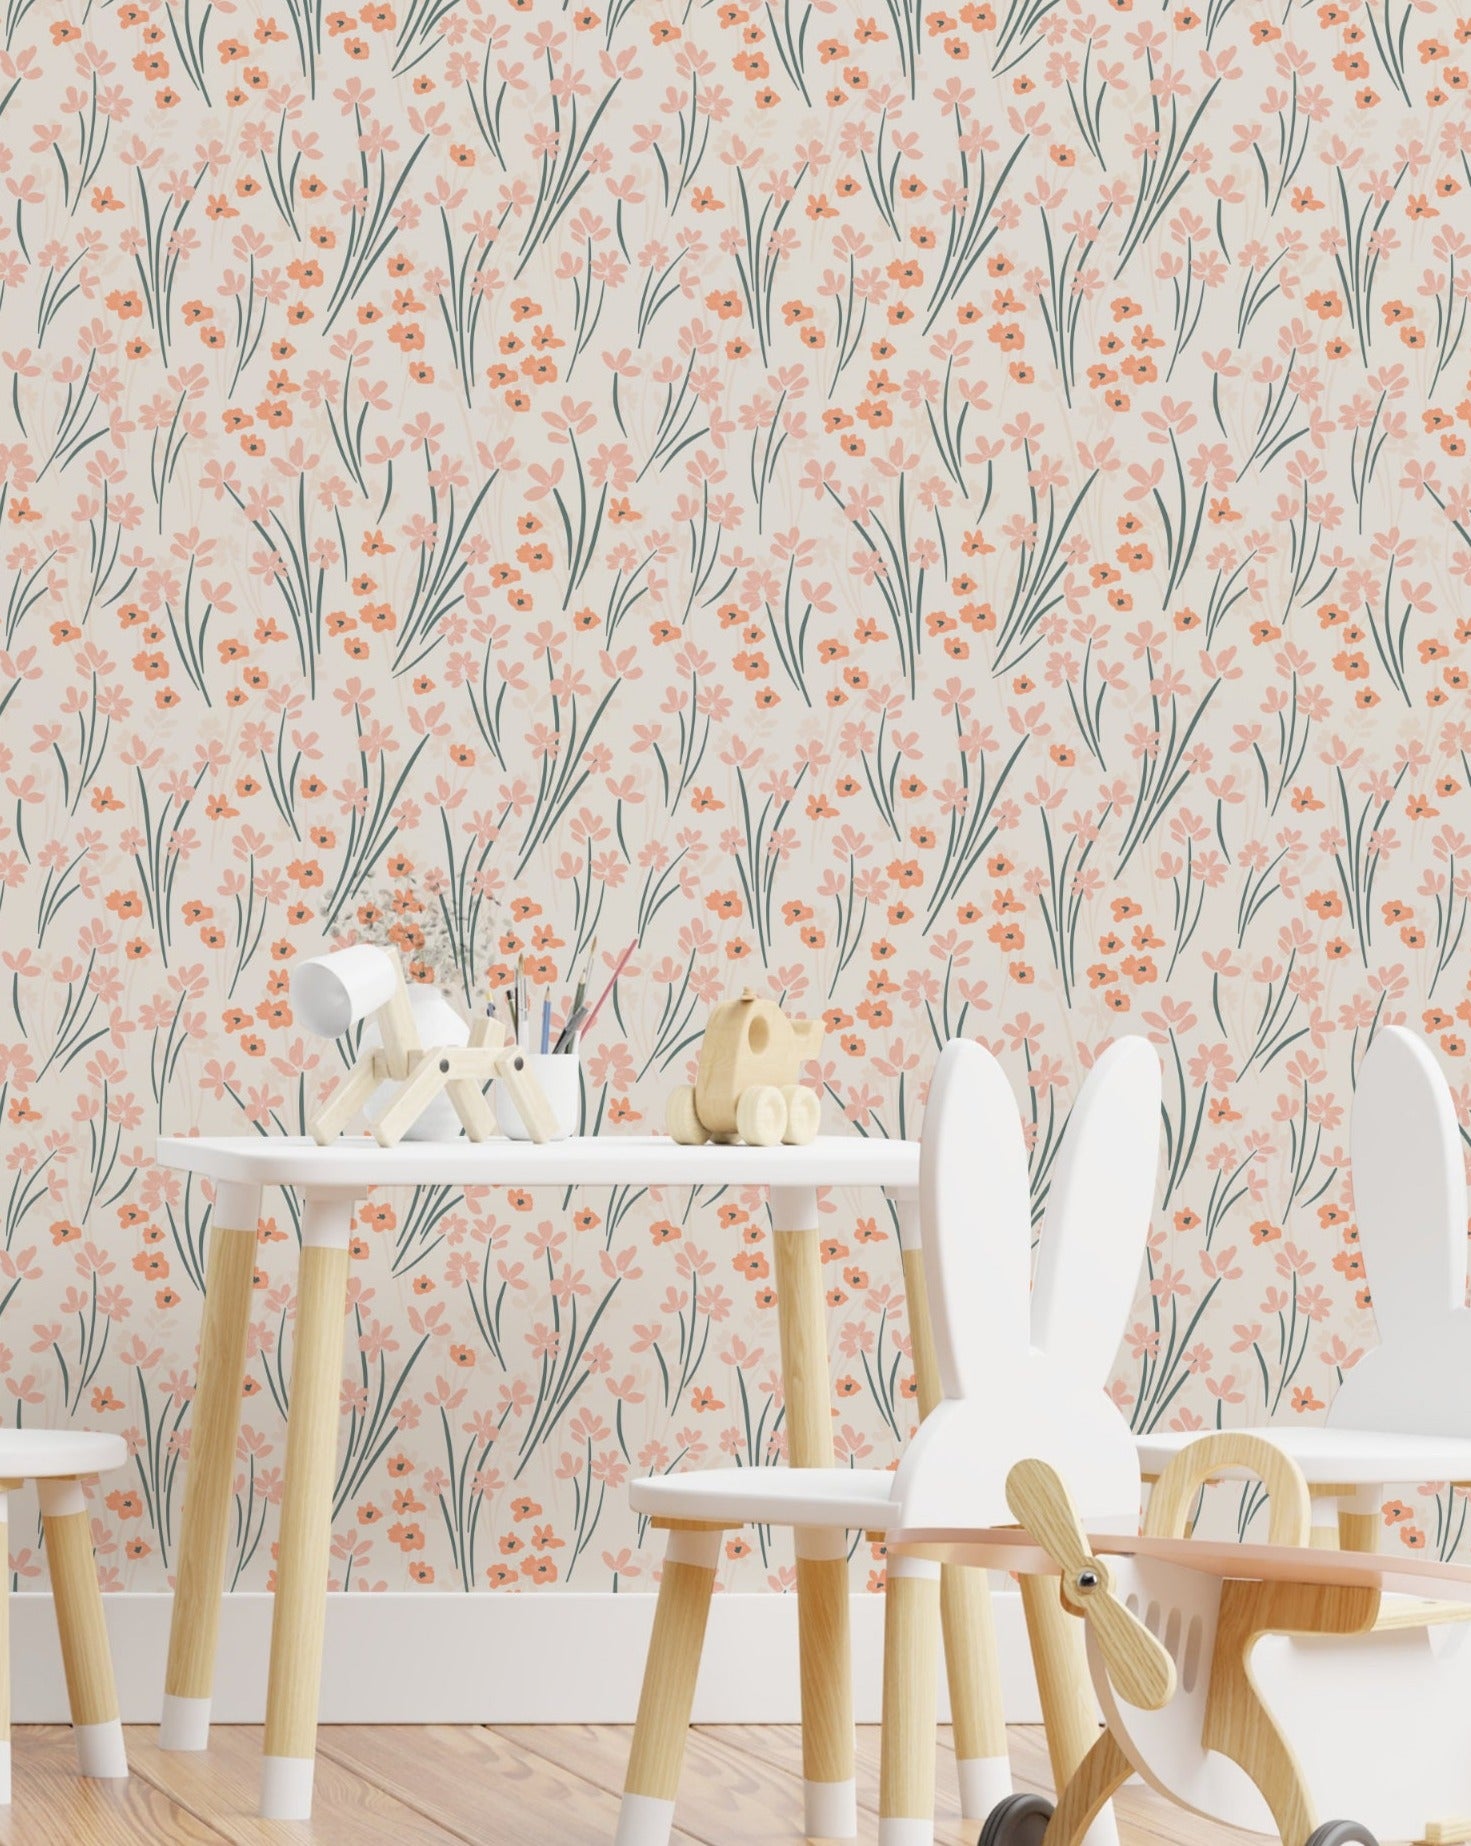 A vibrant and cheerful children's playroom features walls covered with the orange and pink floral wallpaper. The space is furnished with a white table, whimsical animal-shaped chairs, and wooden toys, creating a playful and inviting atmosphere.